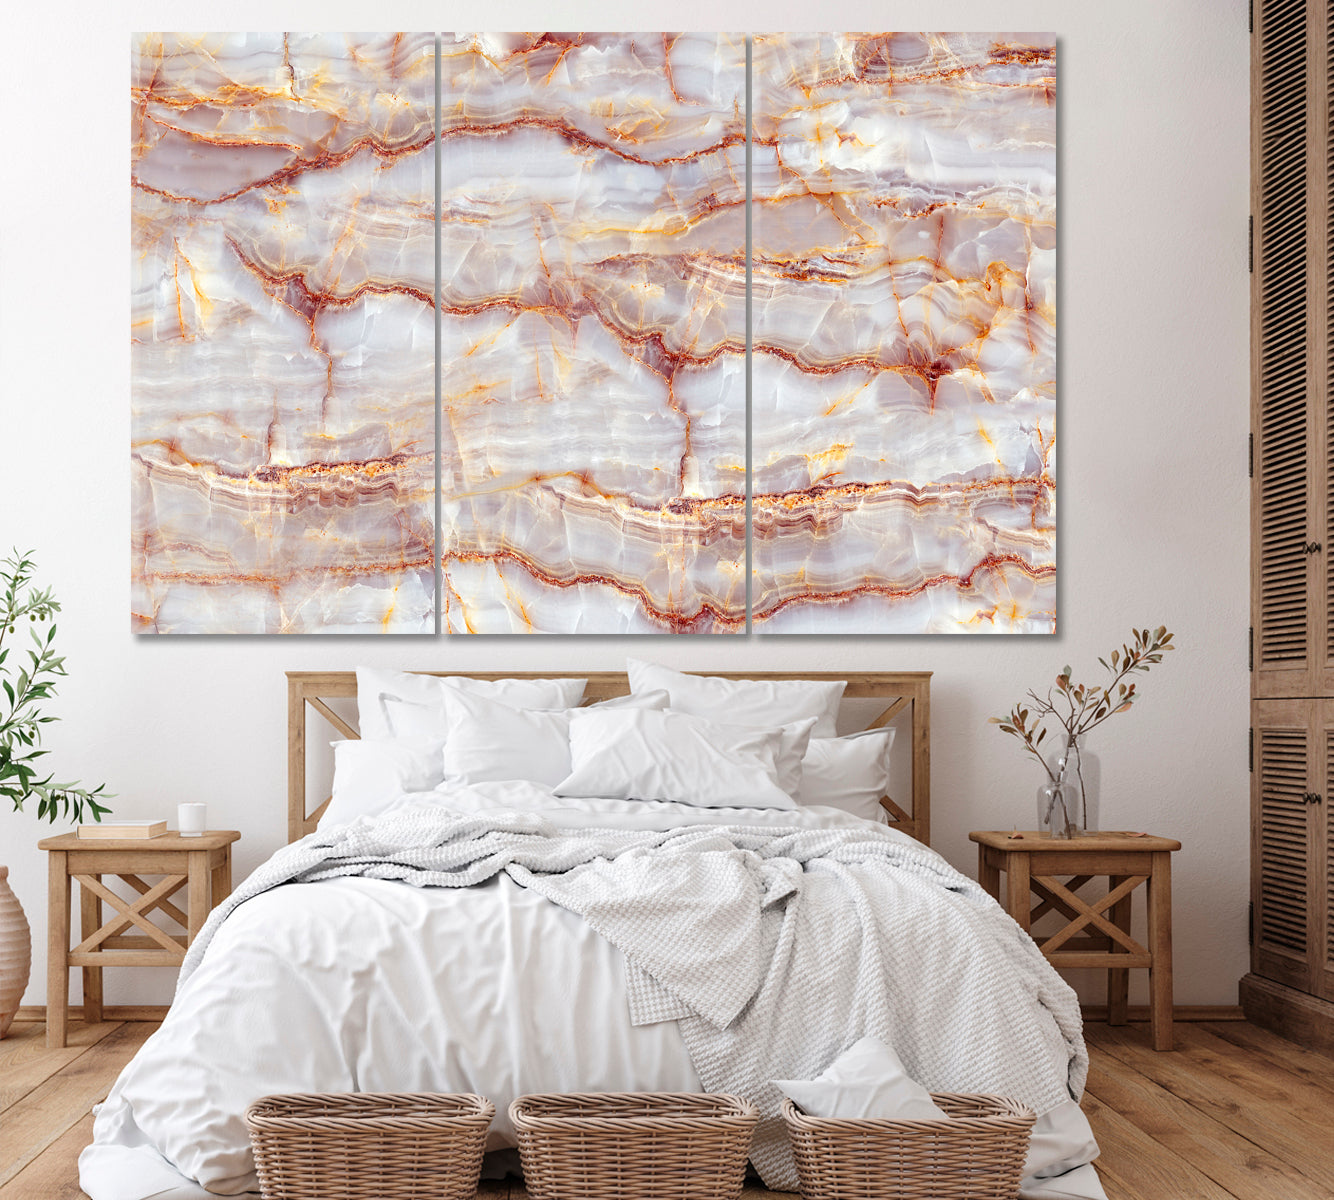 Natural Marble with Veins Canvas Print ArtLexy 3 Panels 36"x24" inches 